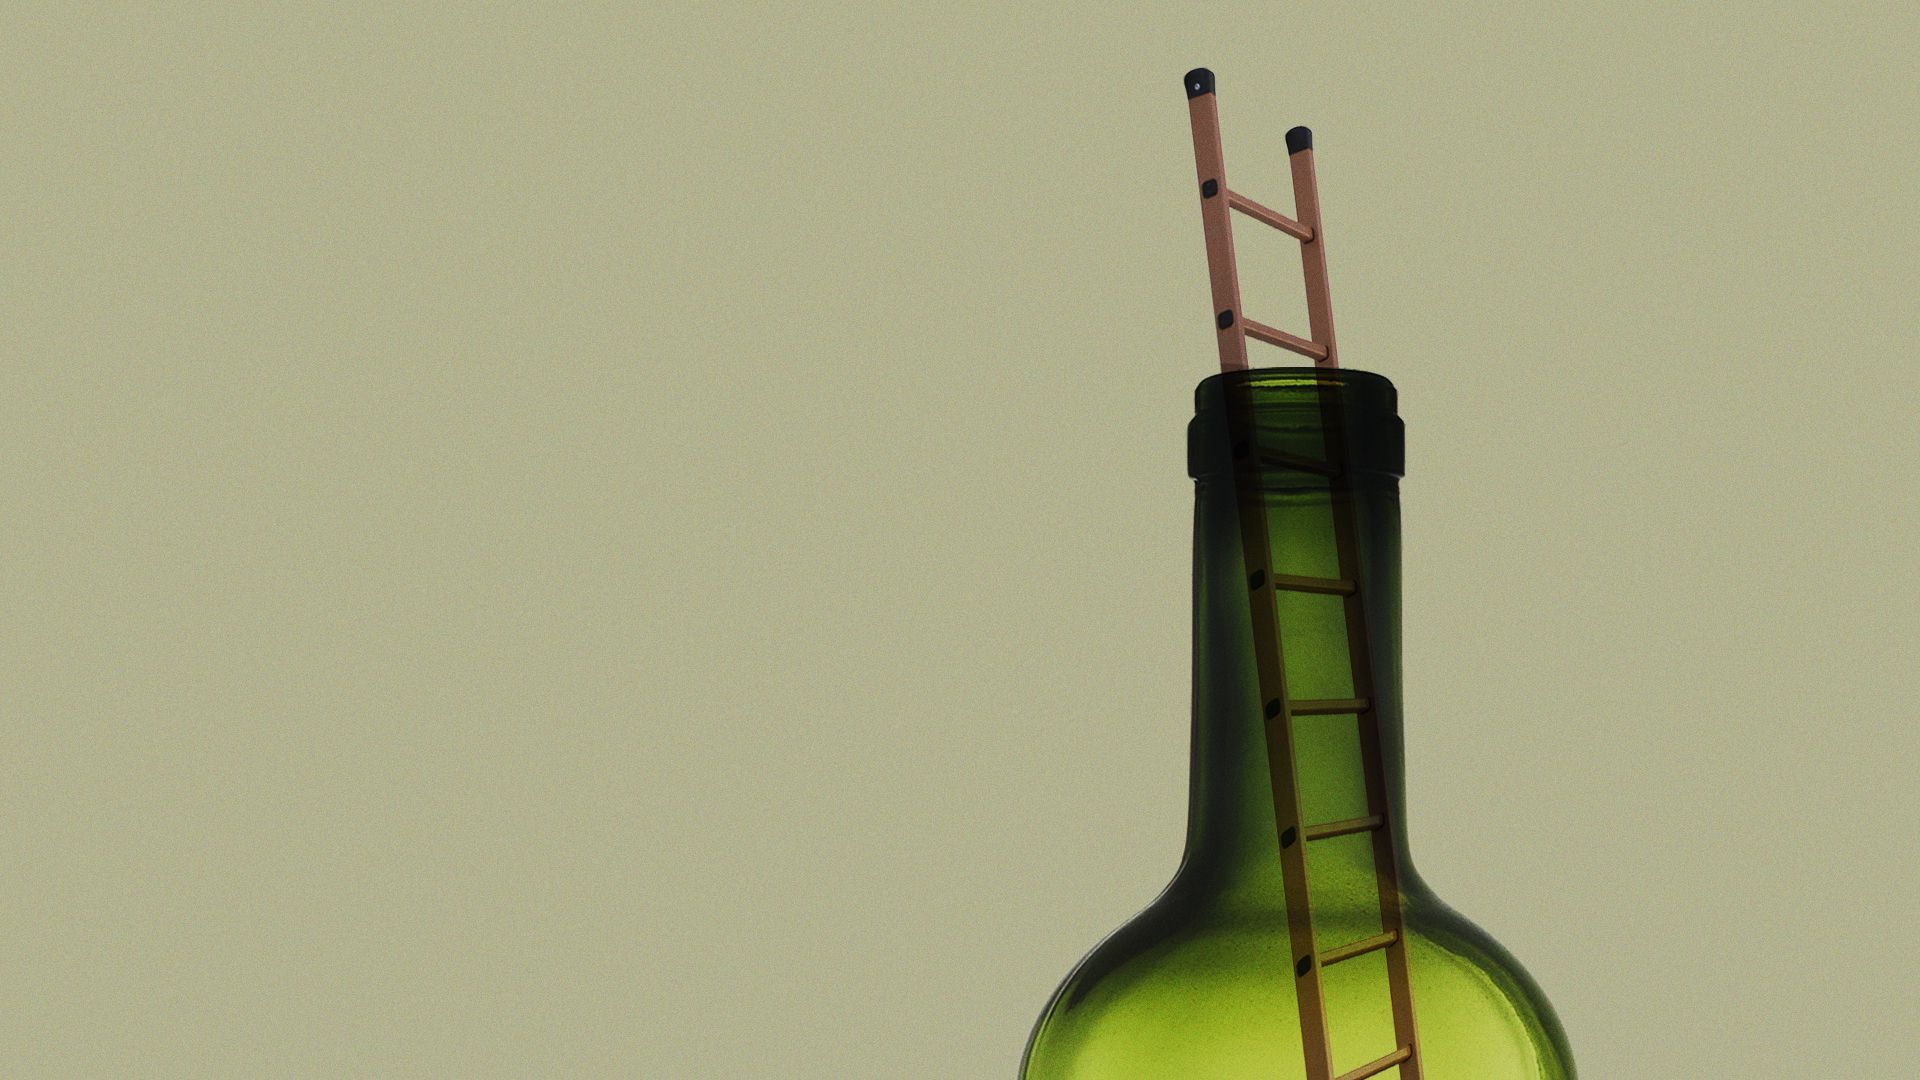 A ladder coming out of an empty wine bottle.